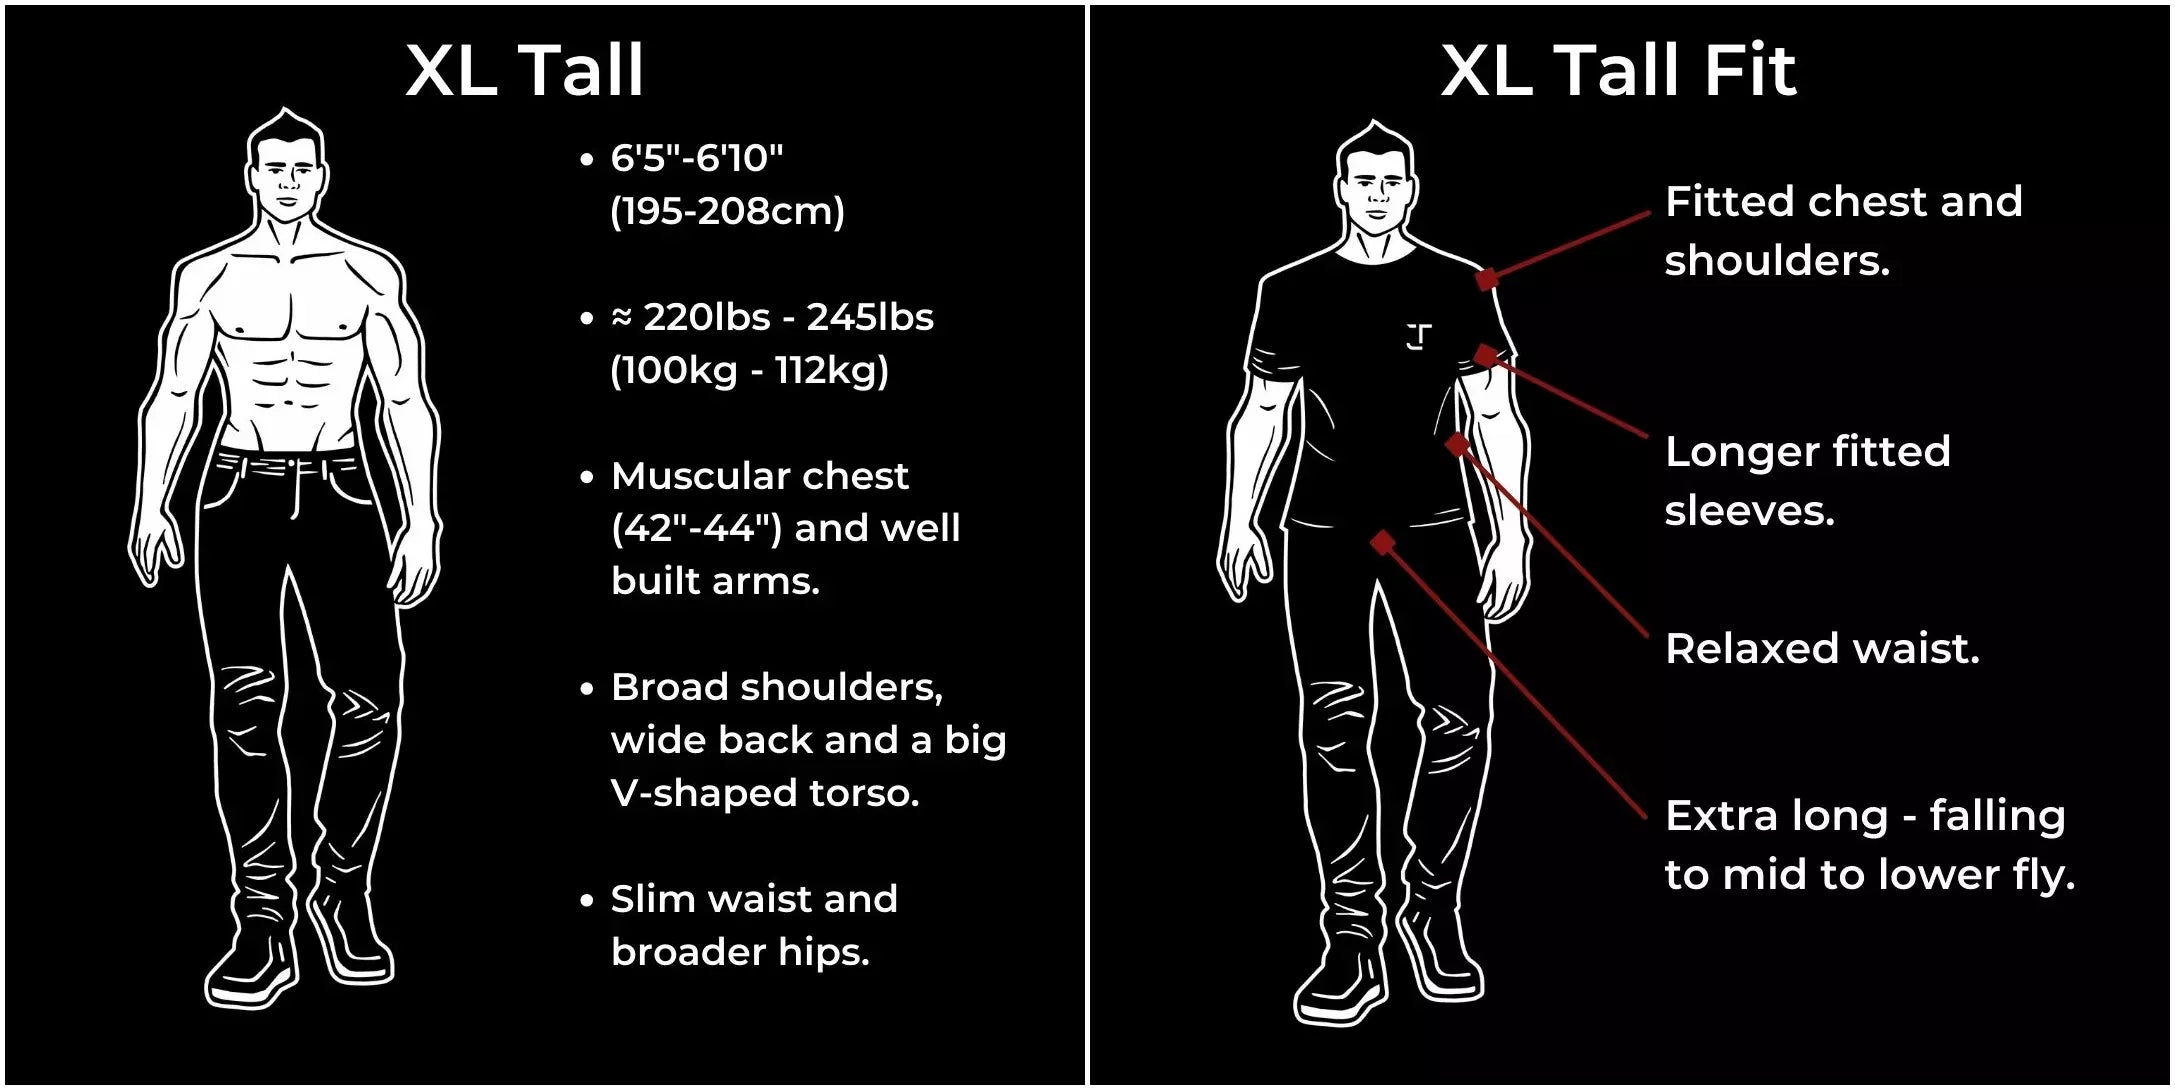 XL tall for tall and muscular guys 220-245lbs and 6'5